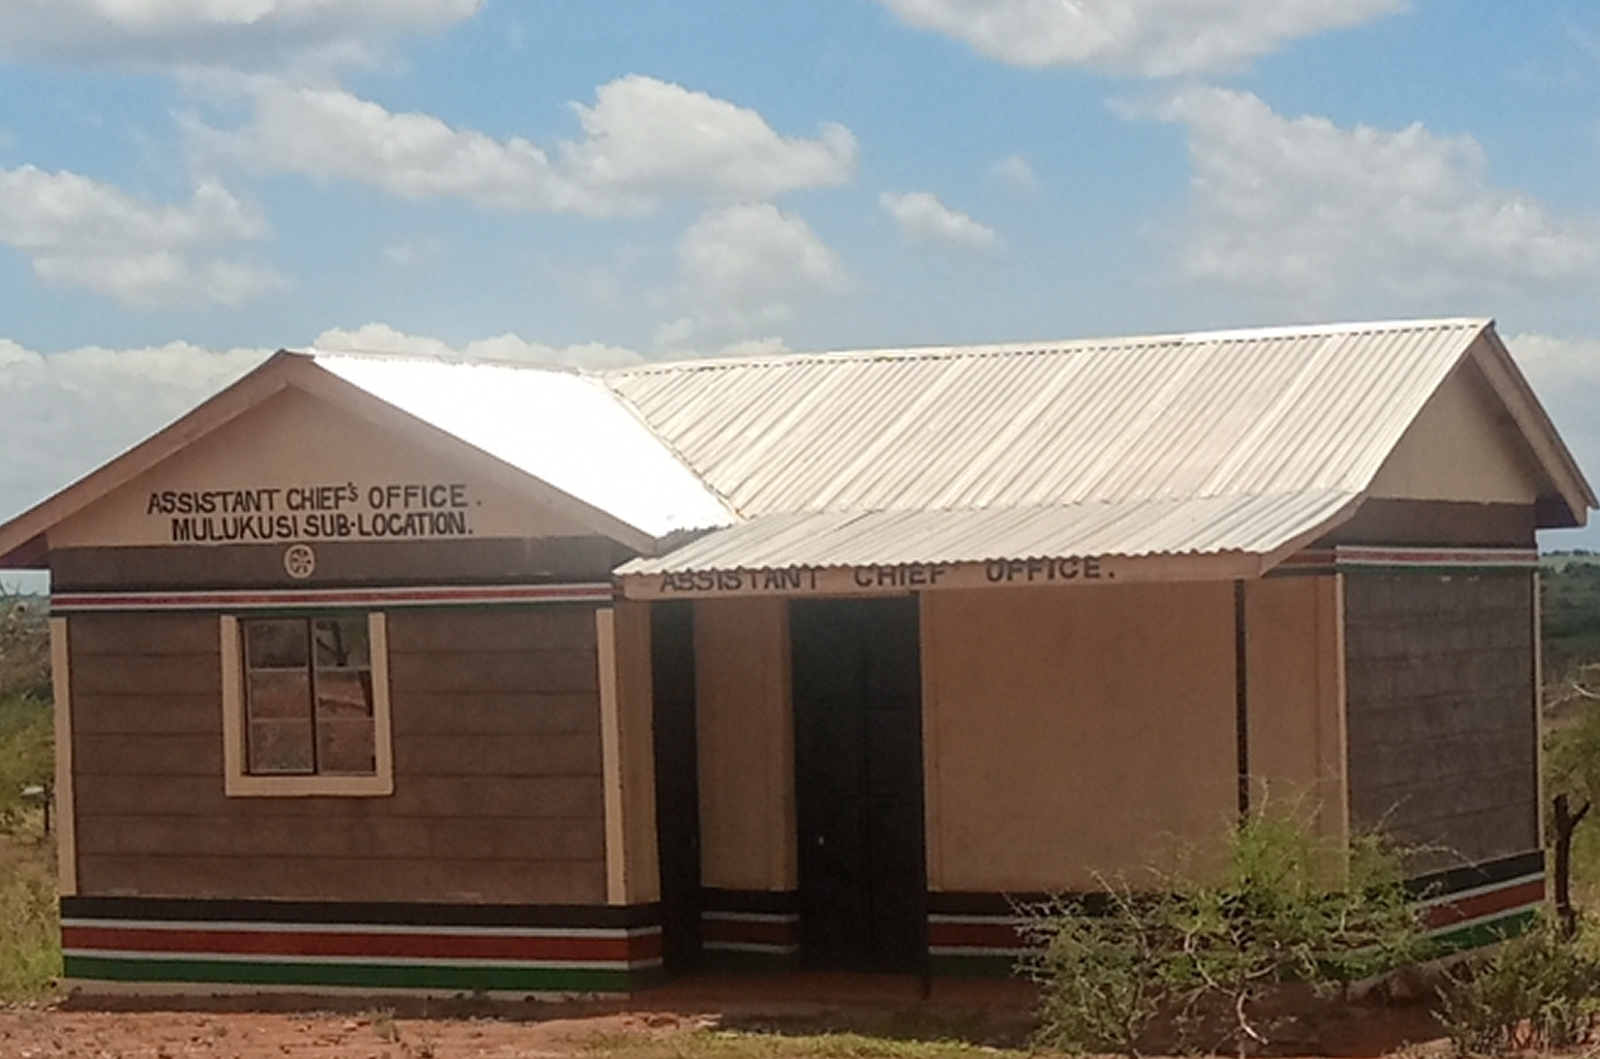 Roof constructed for Office of Asst. Chief Mulukusi Sub location